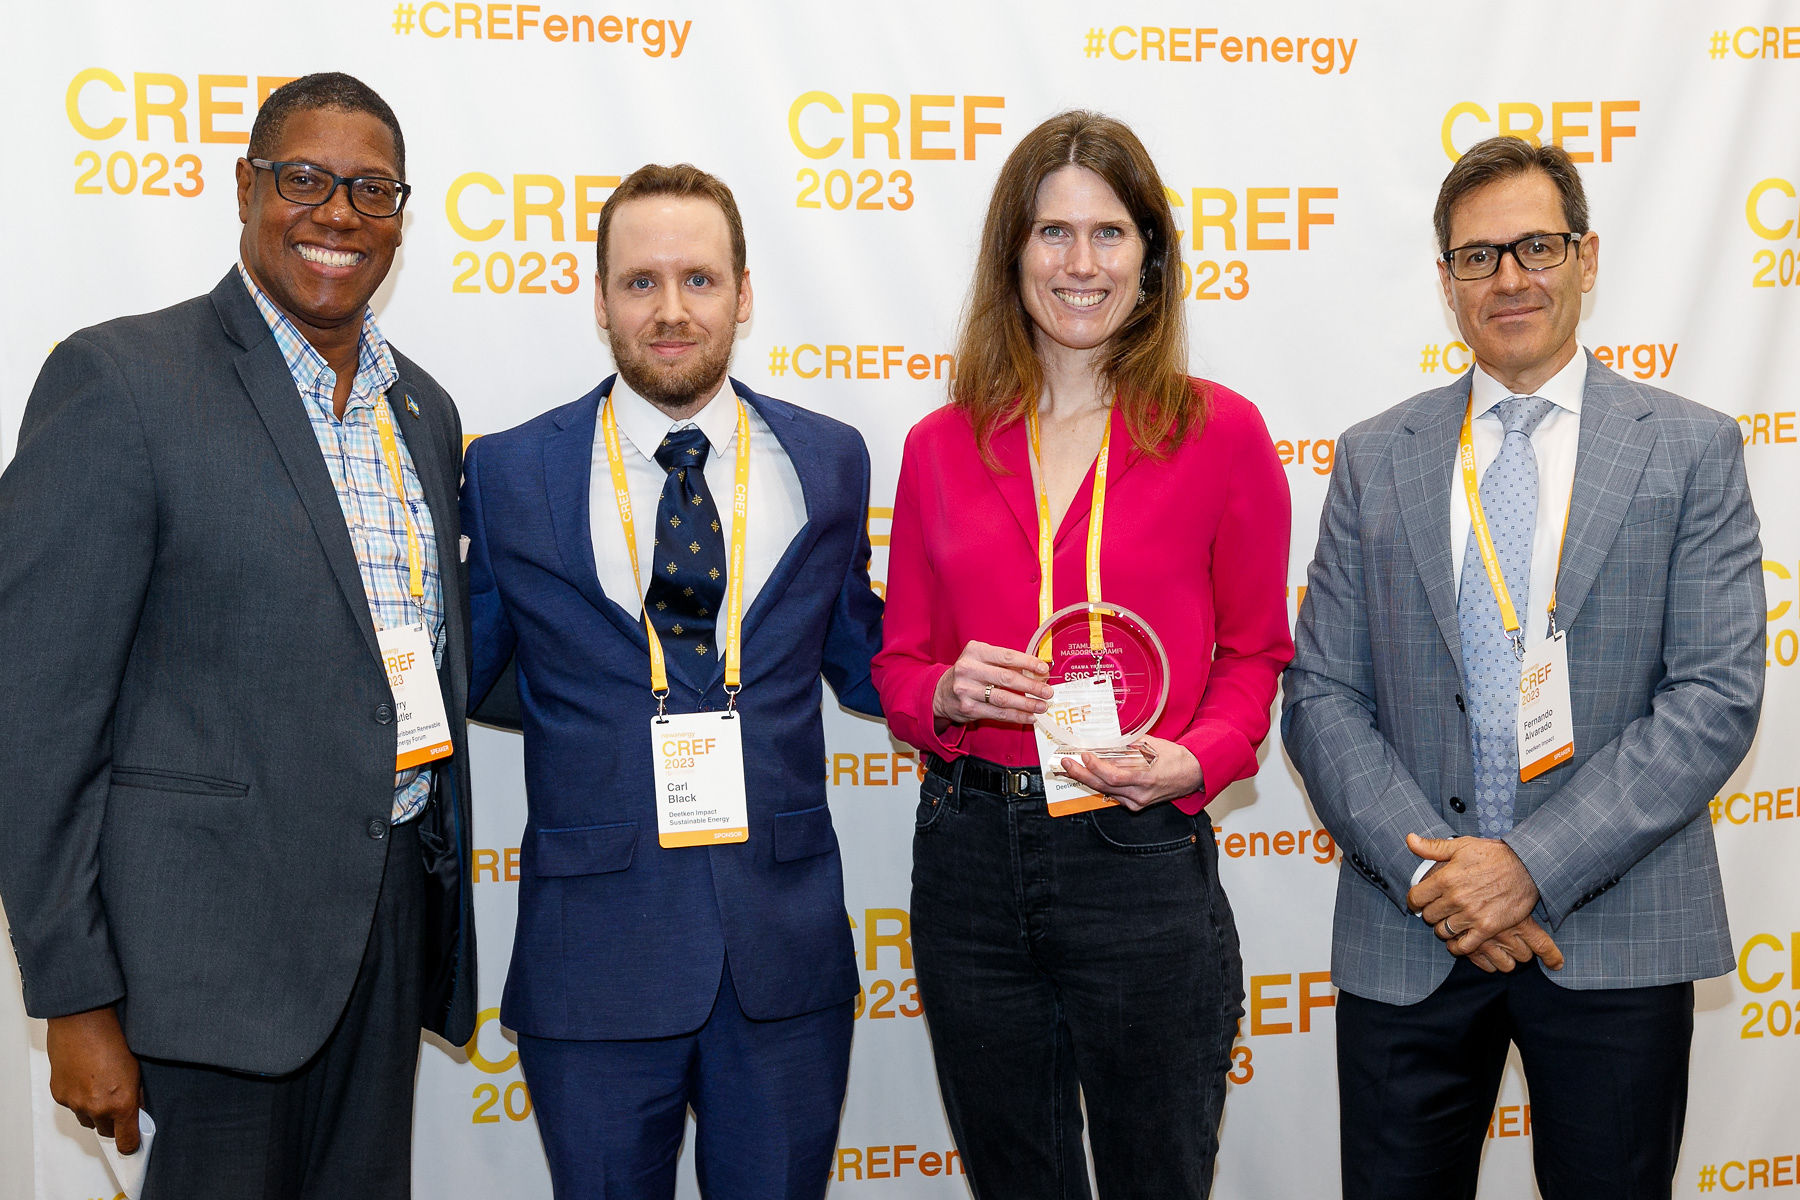 Deetken Impact Recognized With Two Accolades at 5th Annual CREF Industry Awards